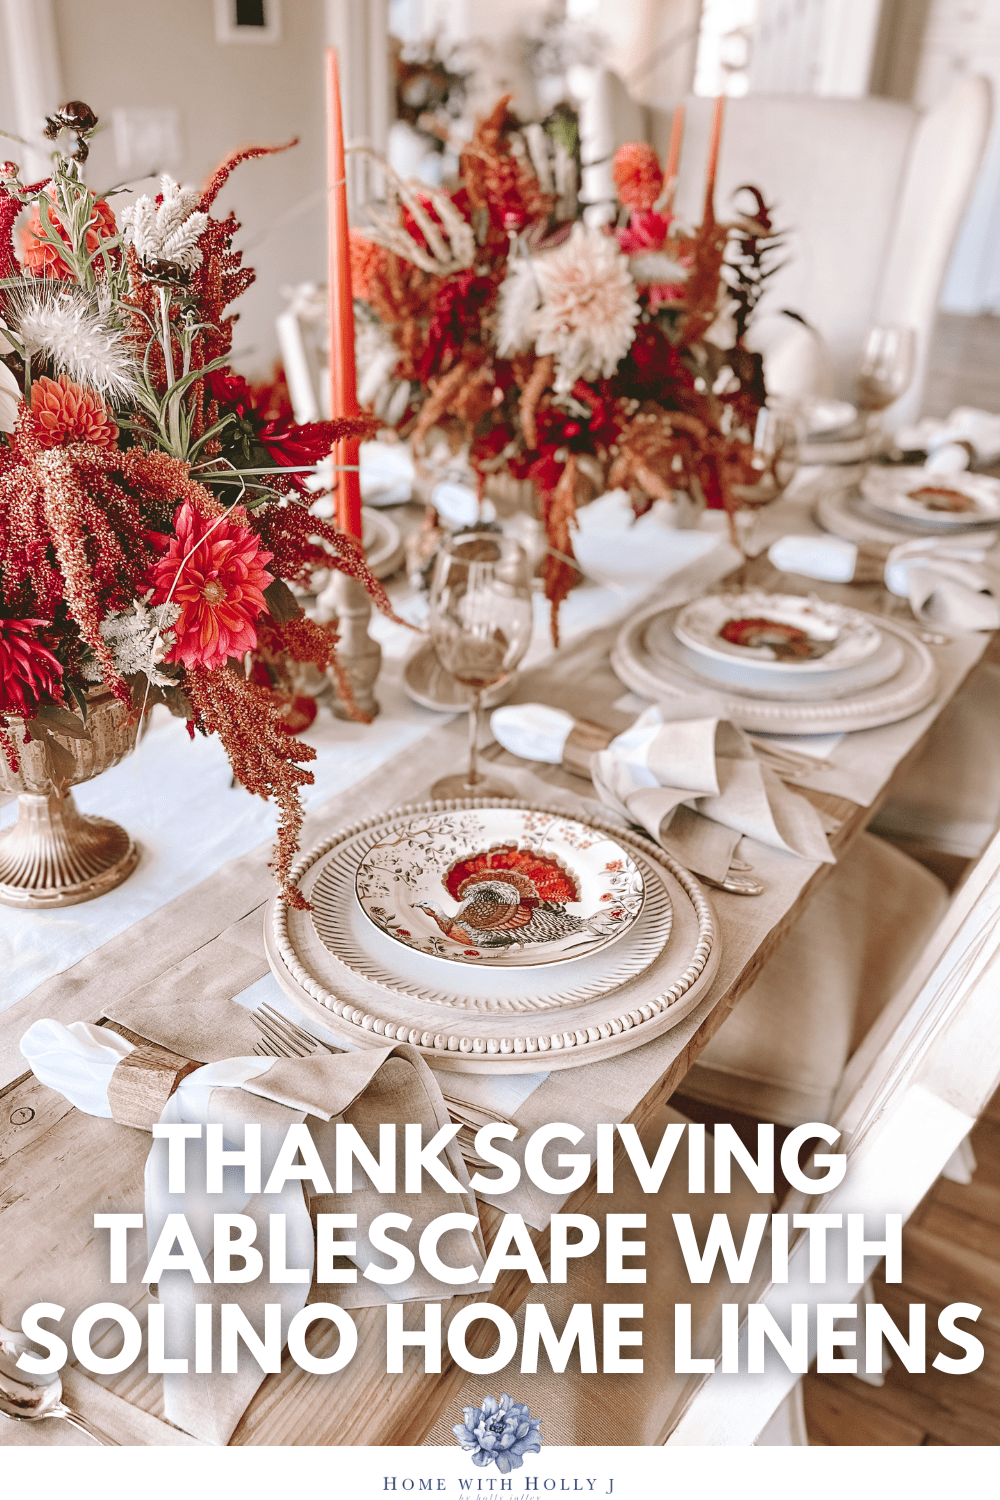 Set the mood for your Thanksgiving celebration with Solino Home's stunning linens, turning an ordinary table into a visual masterpiece. Learn more.